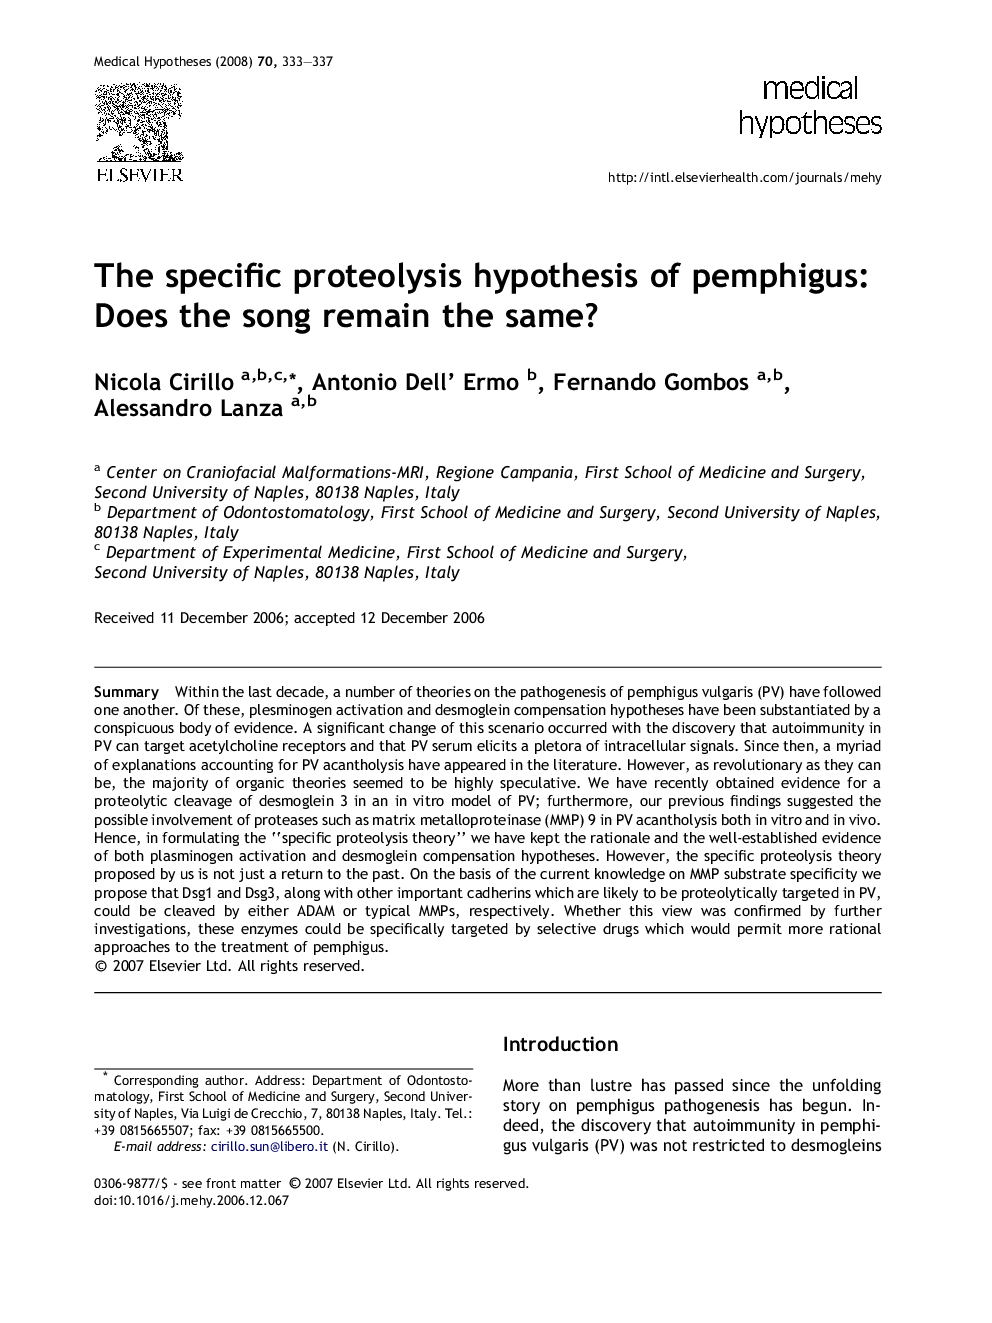 The specific proteolysis hypothesis of pemphigus: Does the song remain the same?